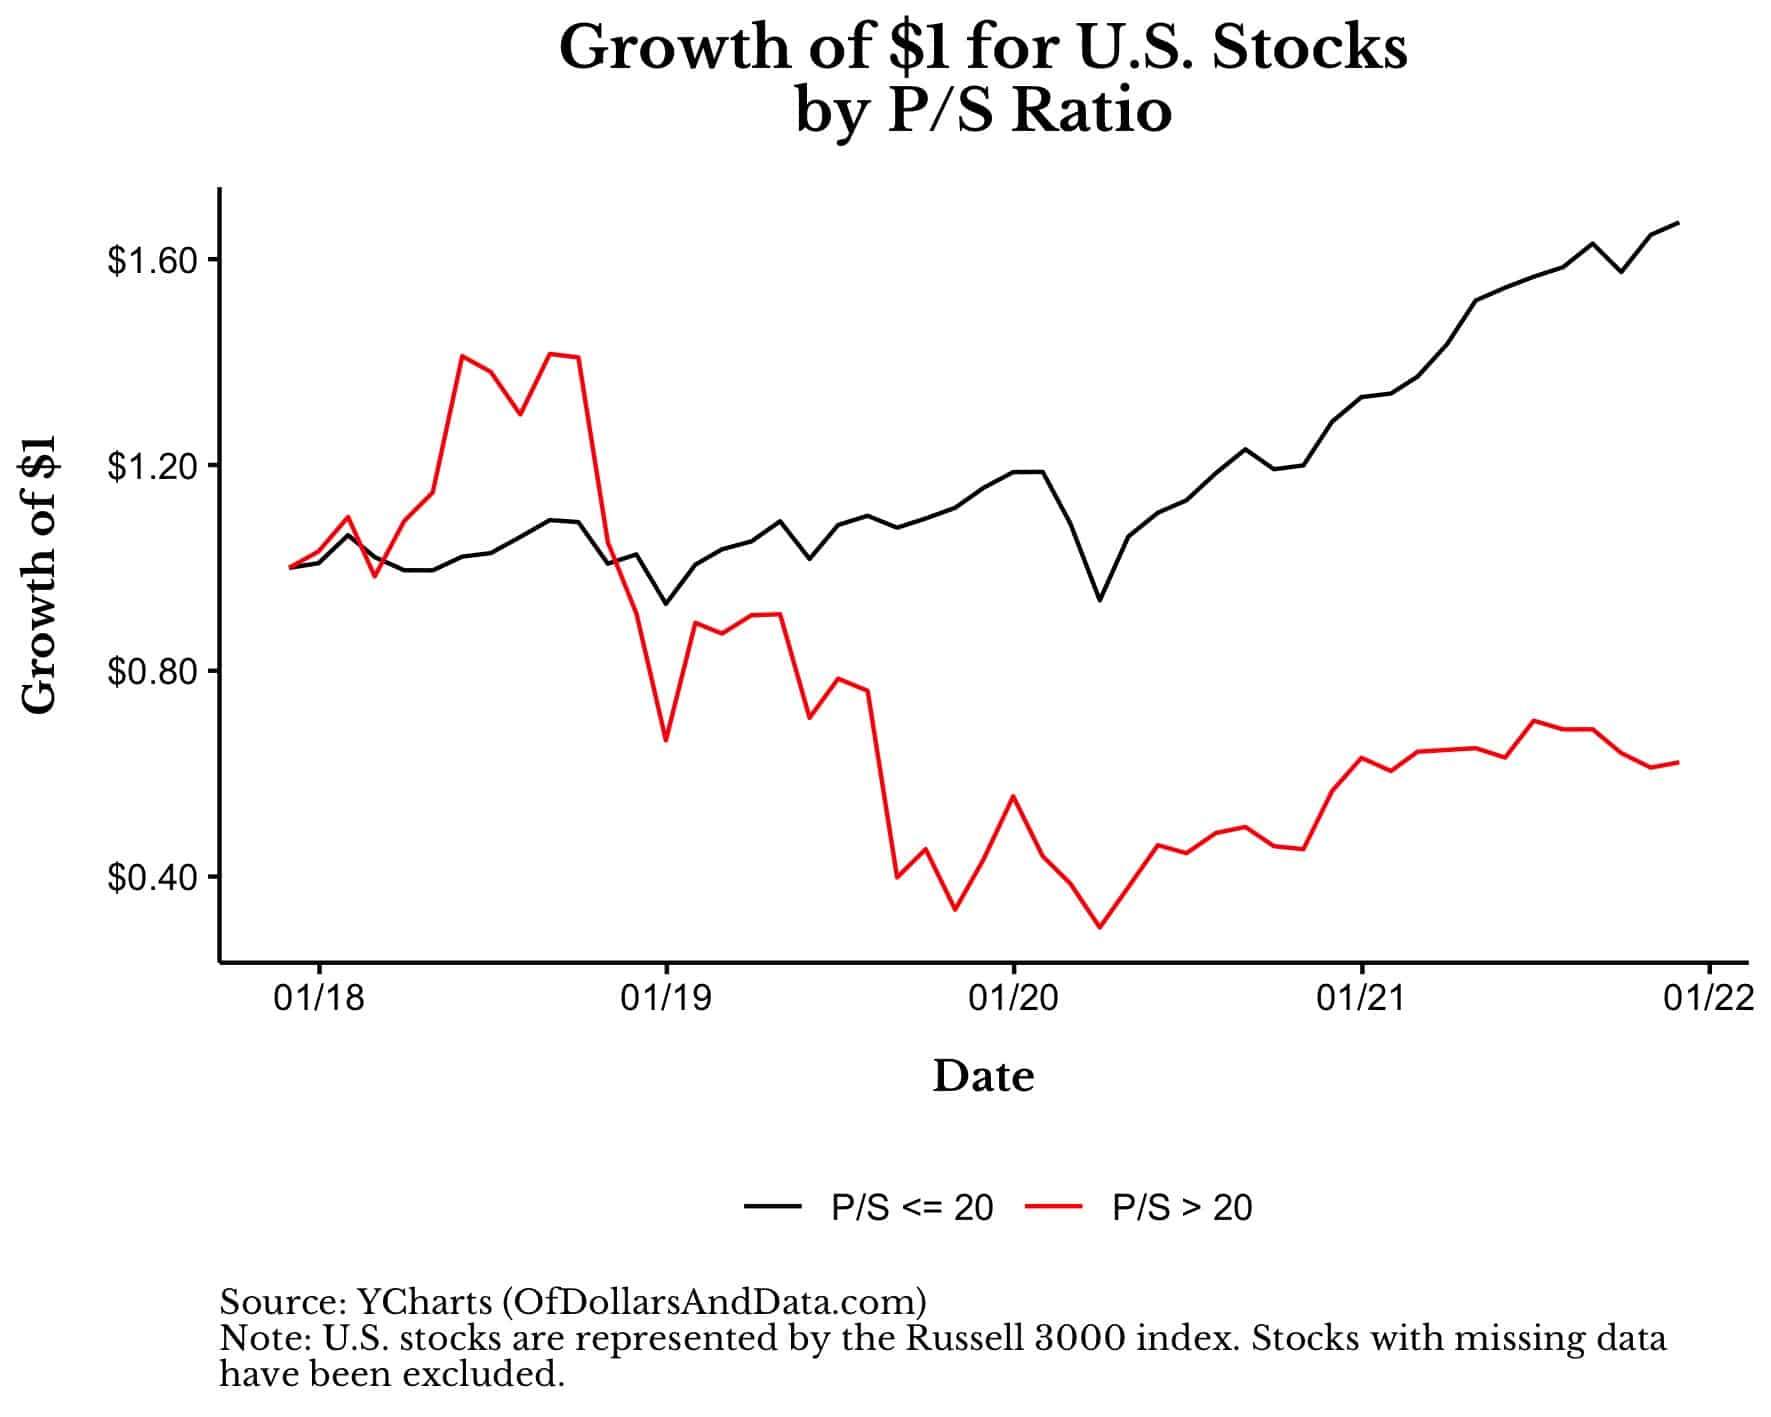 Growth of $1 for U.S. stocks by P/S ratio grouping, 2018-2021